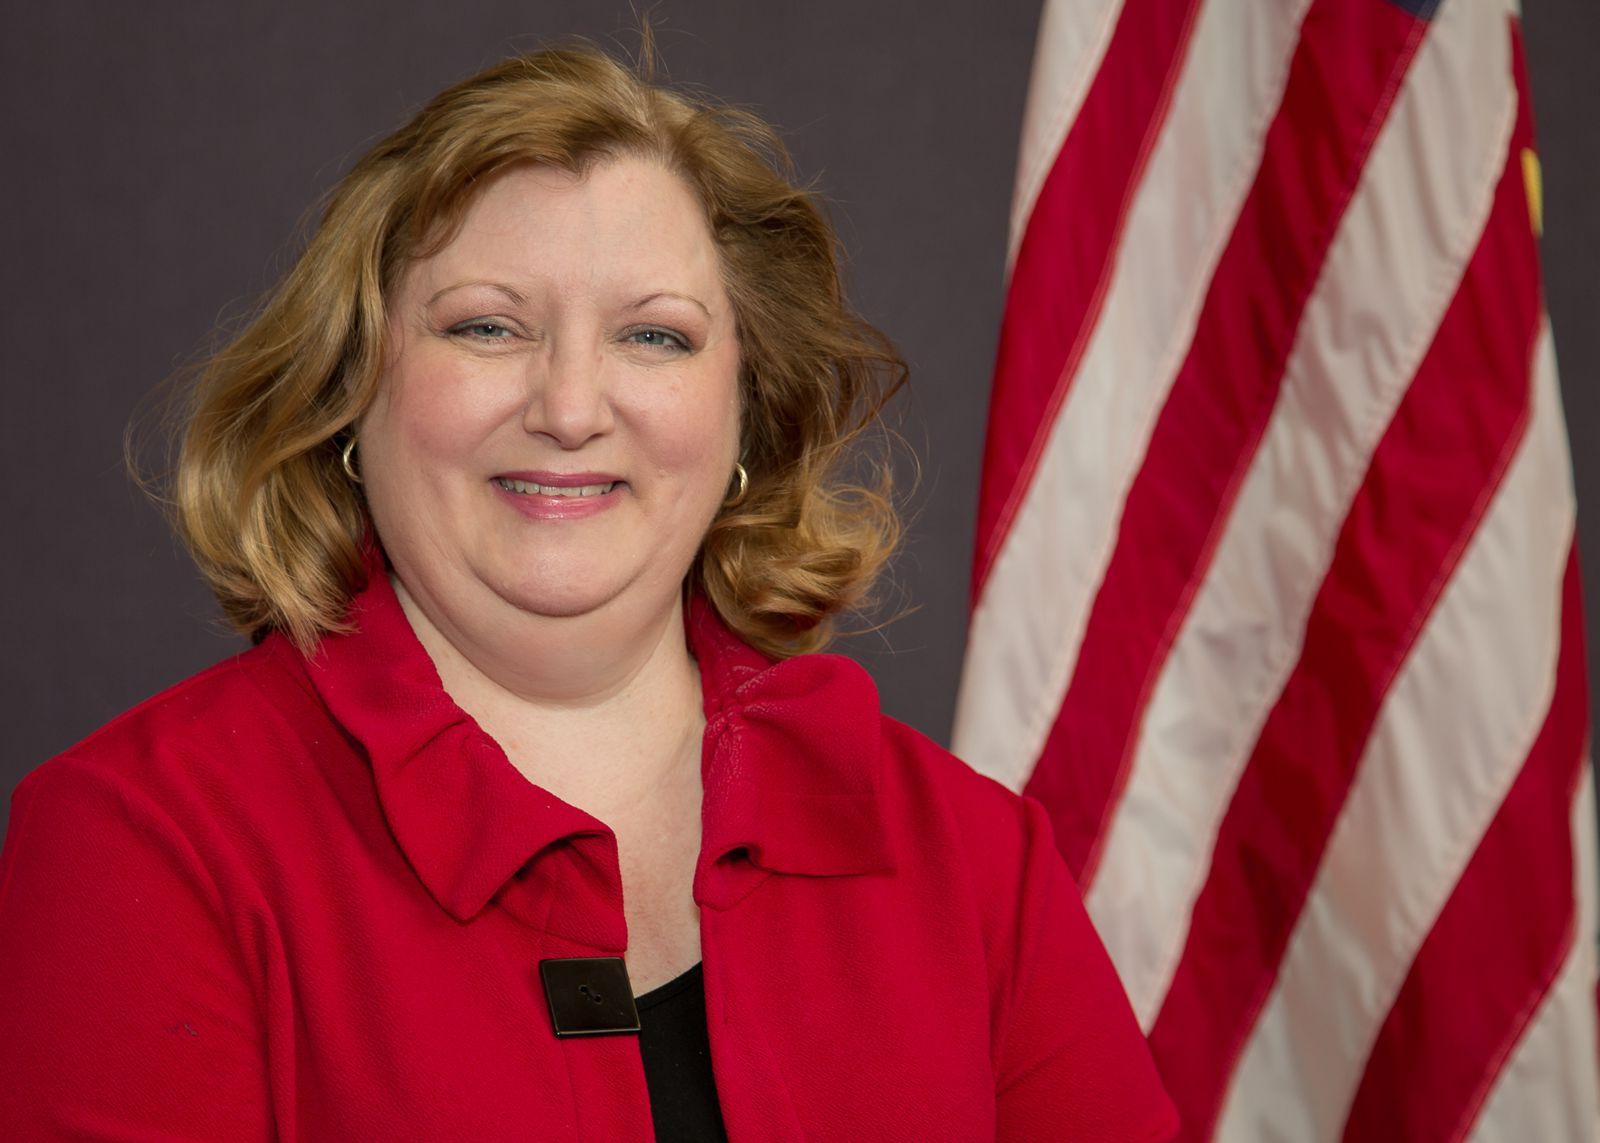 A blonde, white caucasian, Gena Sapp, is wearing a bright red collared jacket over a black shirt and is pictured with the United States flag standing in the back left against a grey background.